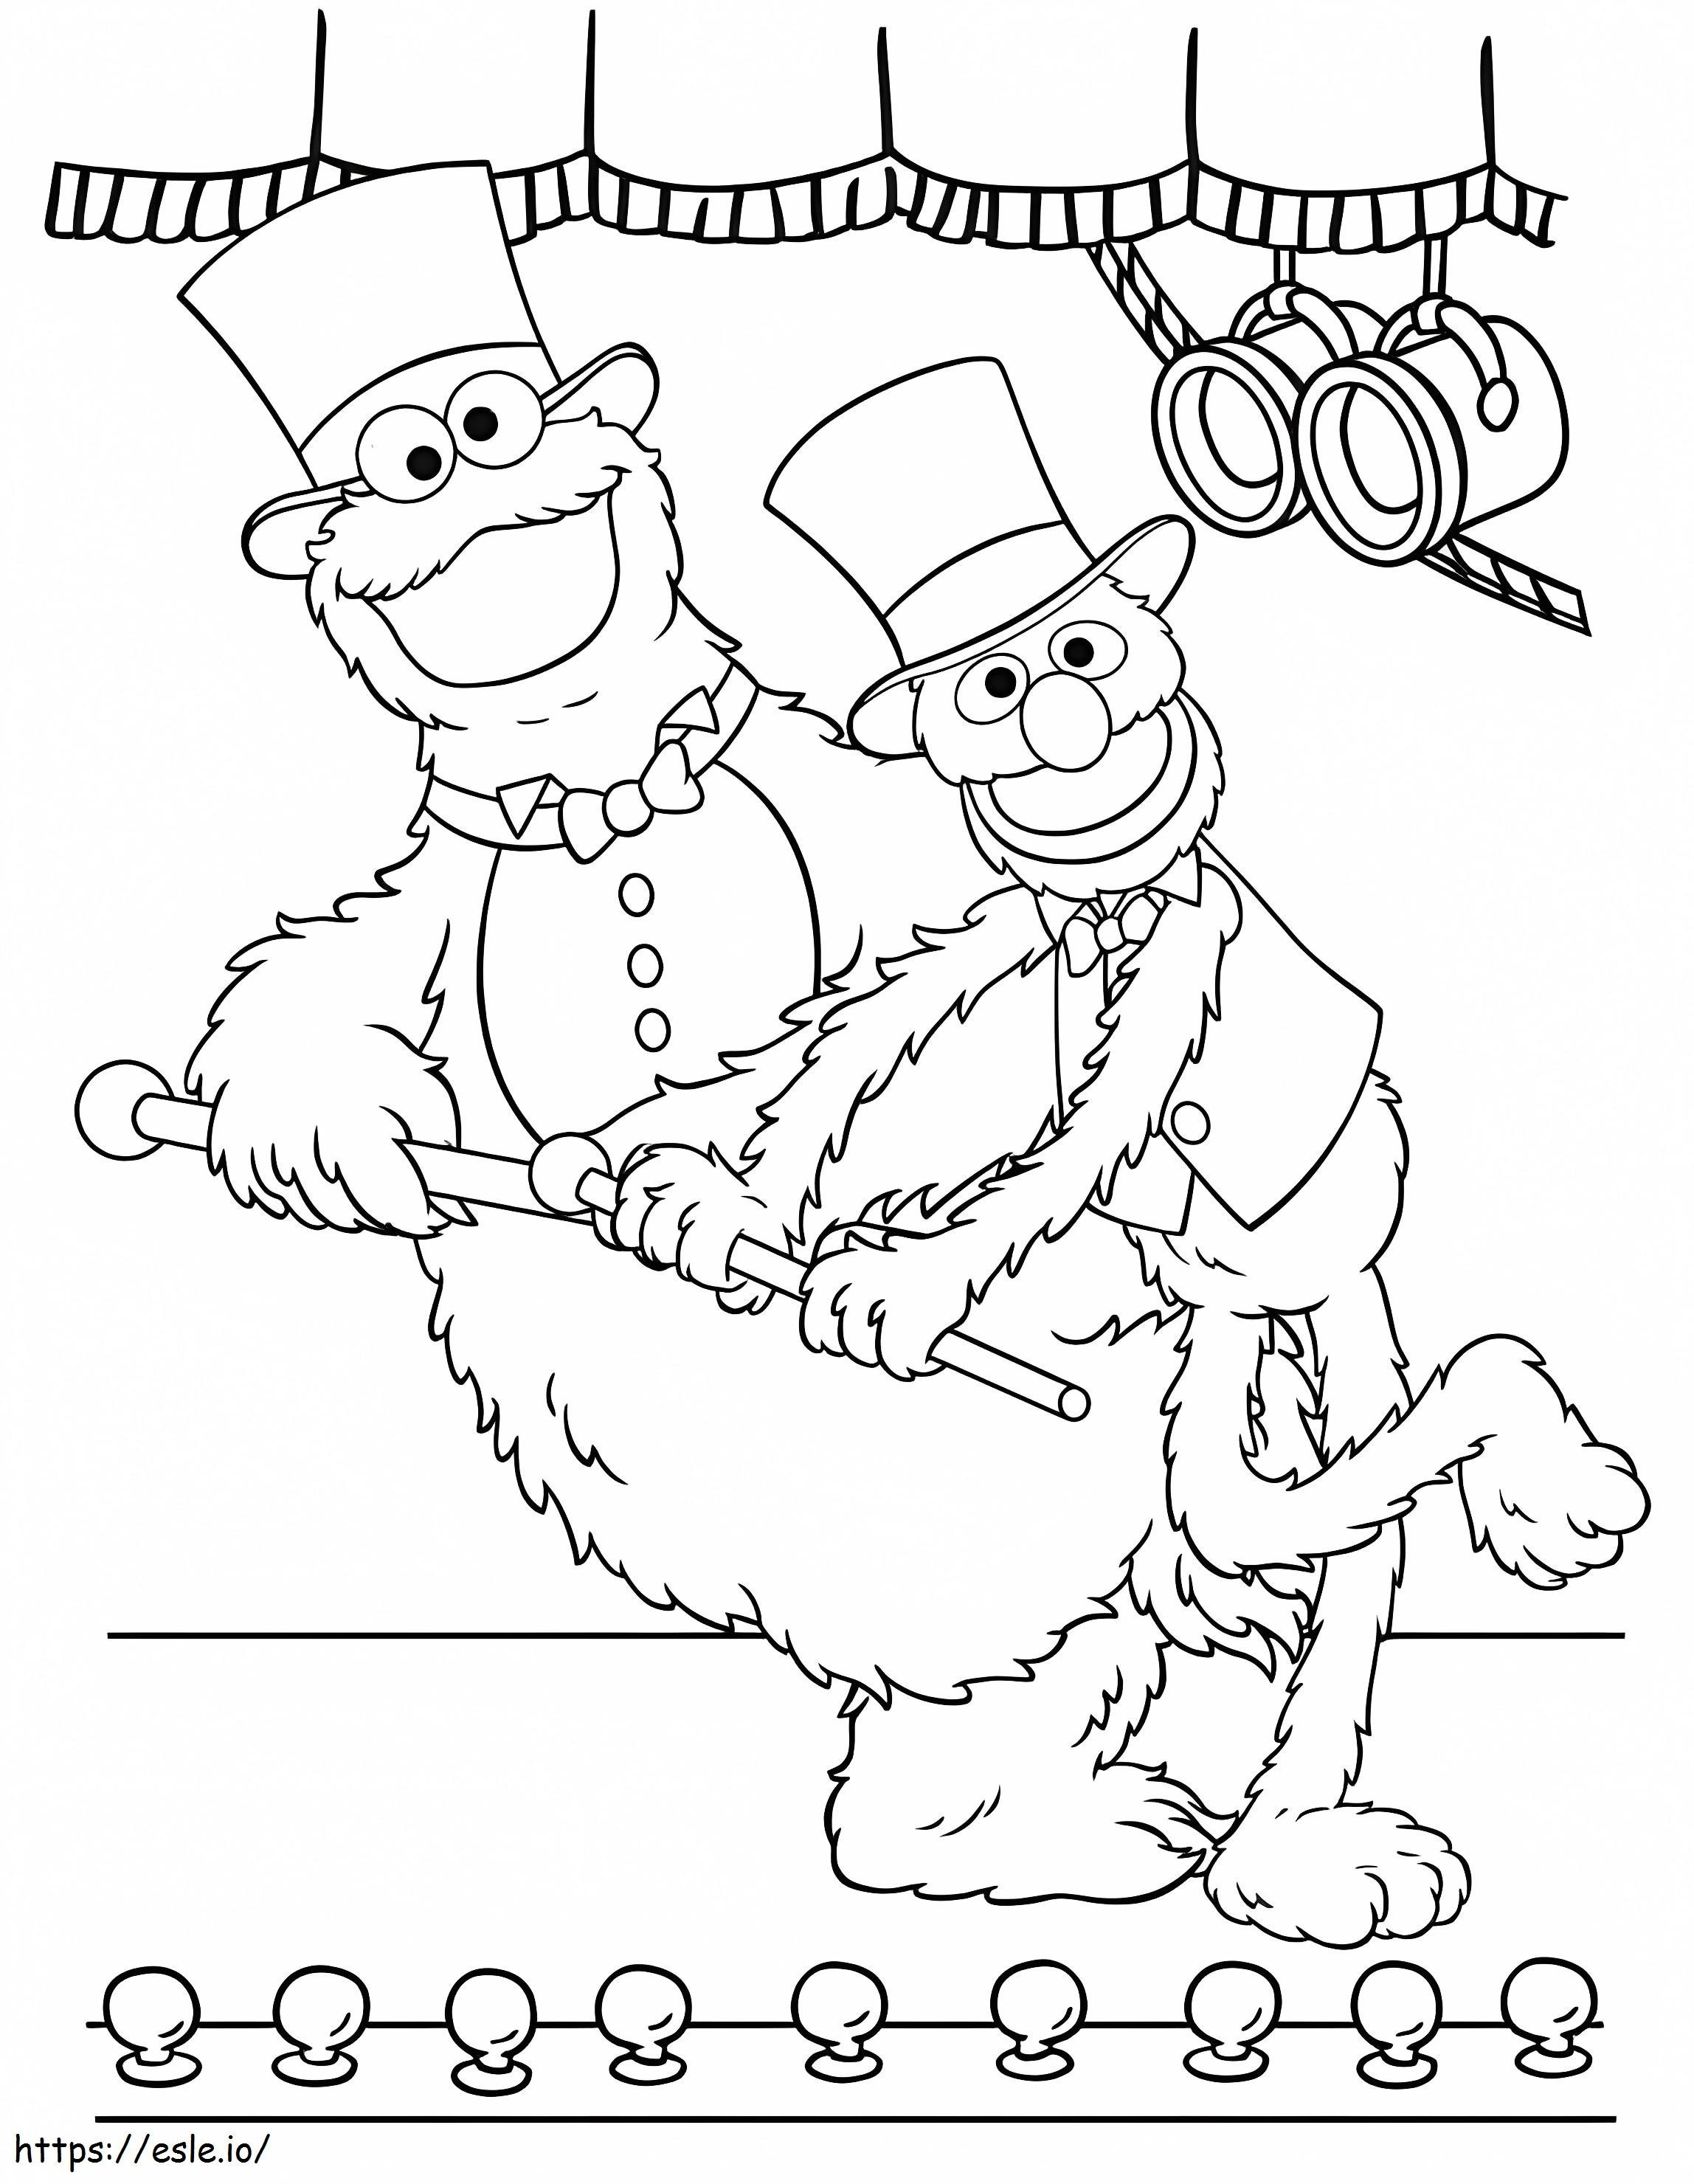 Cookie Monster And Grover coloring page